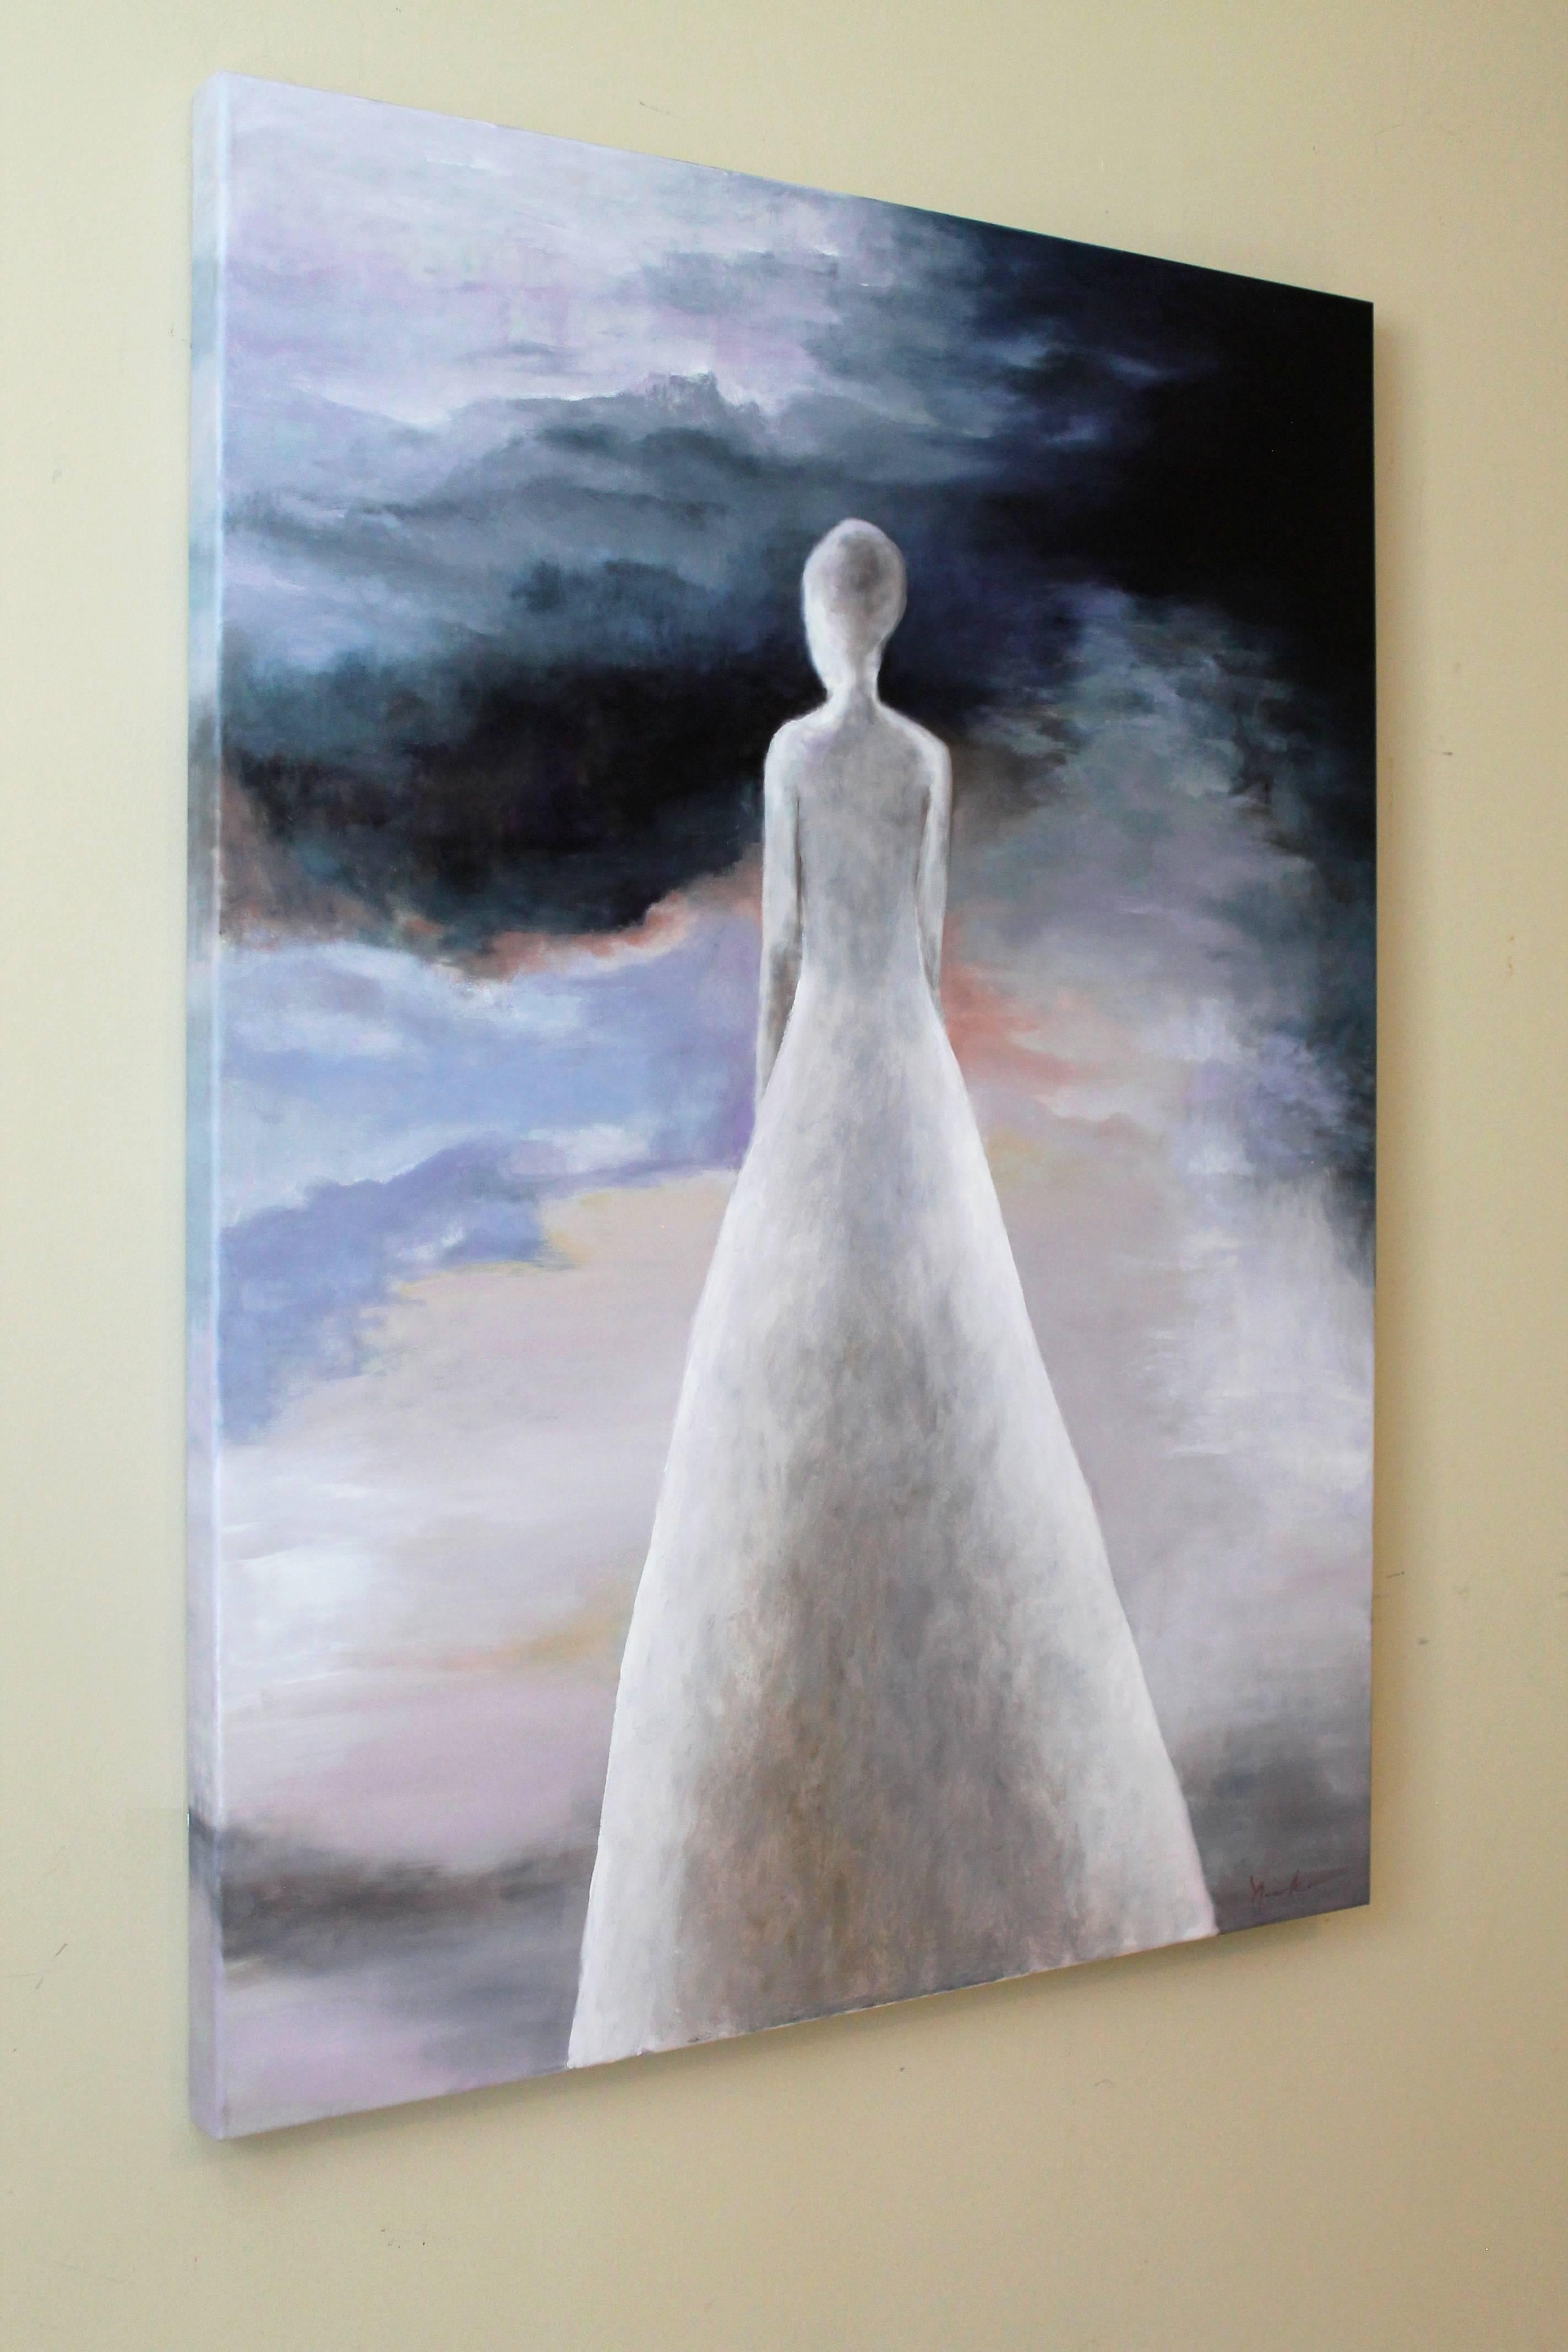 Find Me Standing in the Light IV - Painting by Naoko Paluszak